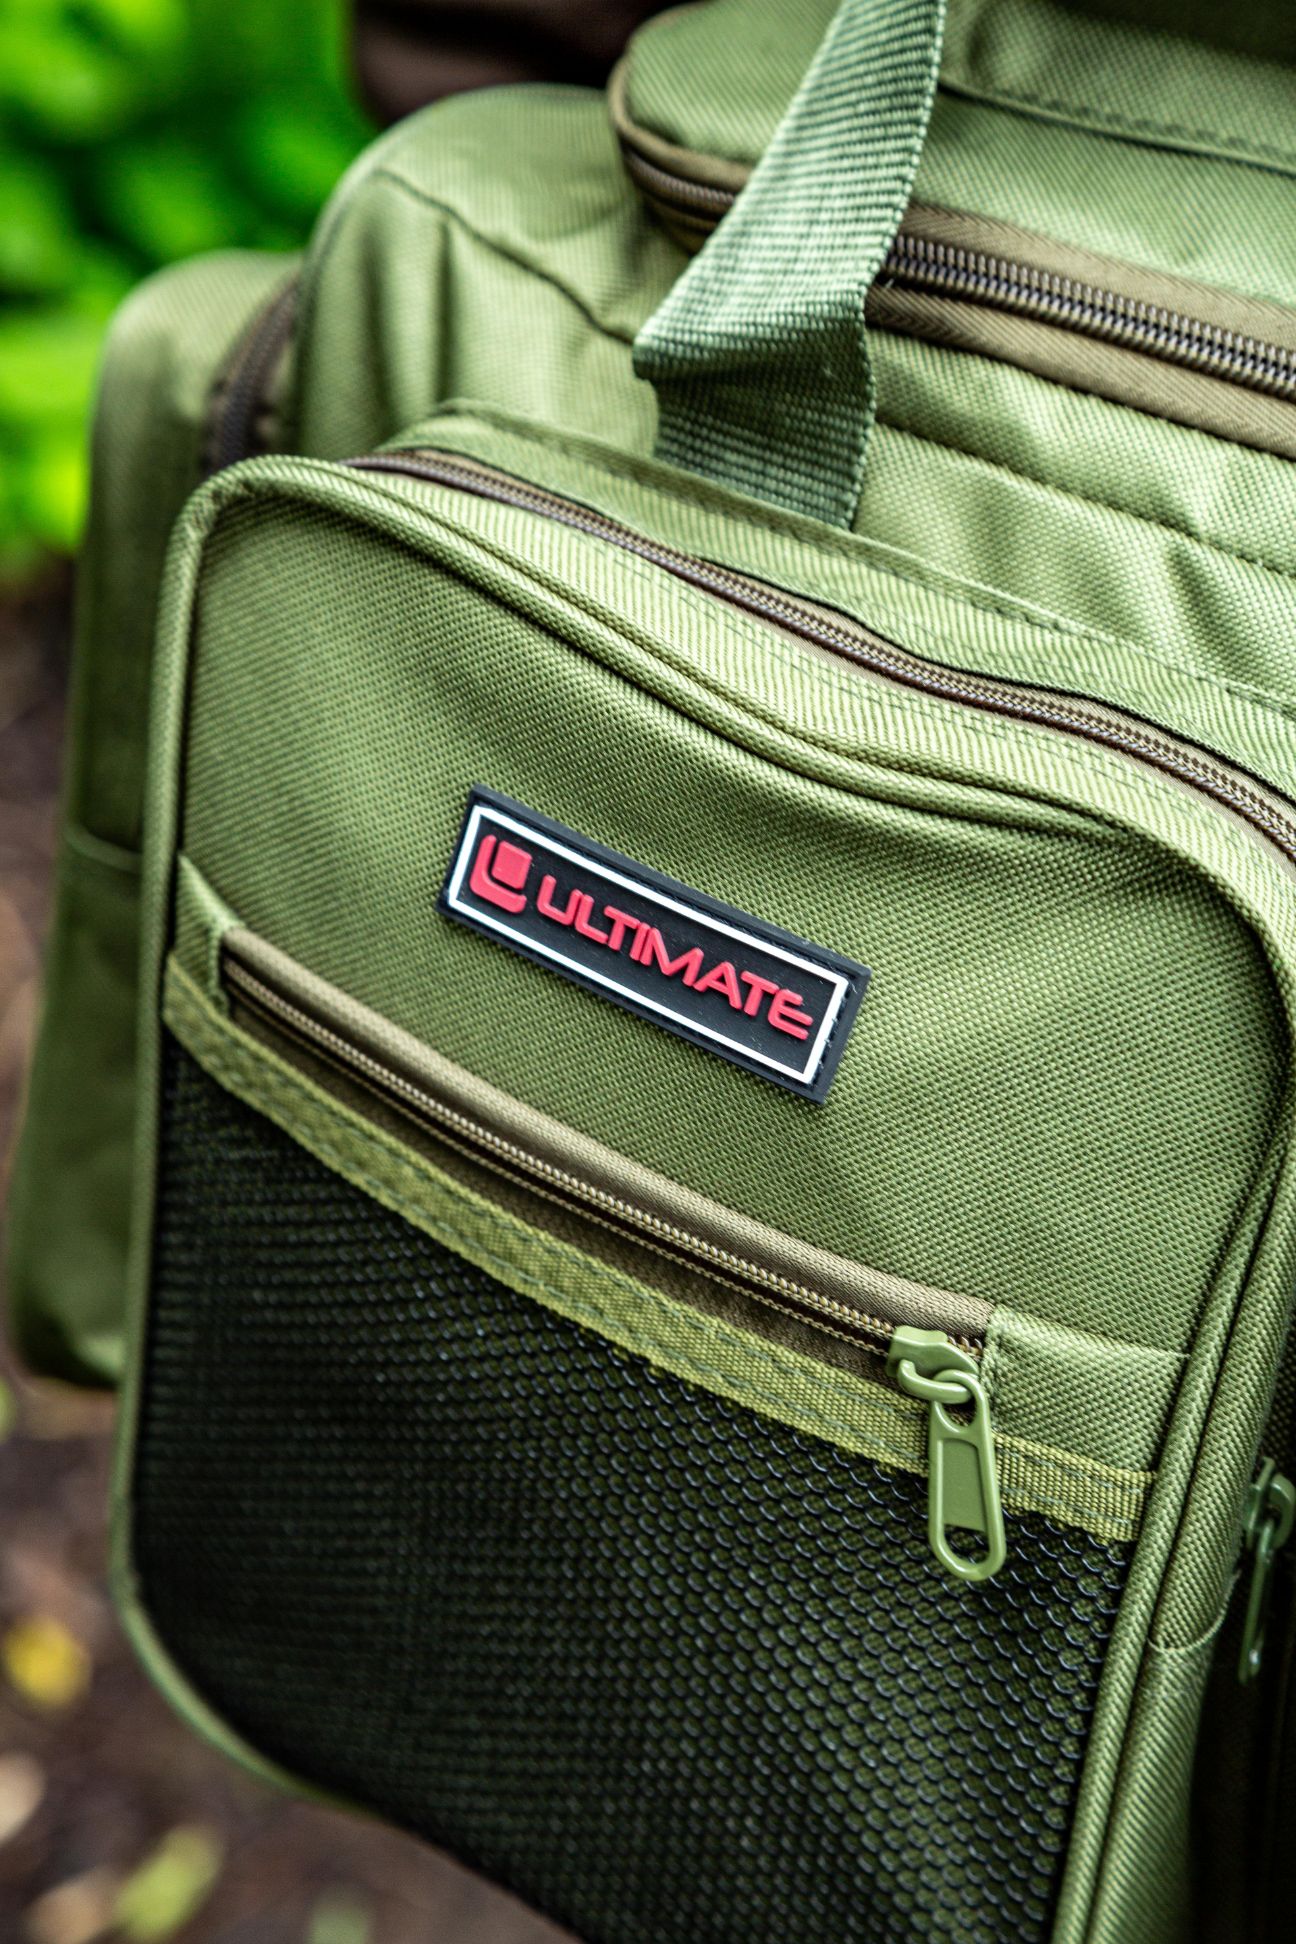 Ultimate Cargo Carryall